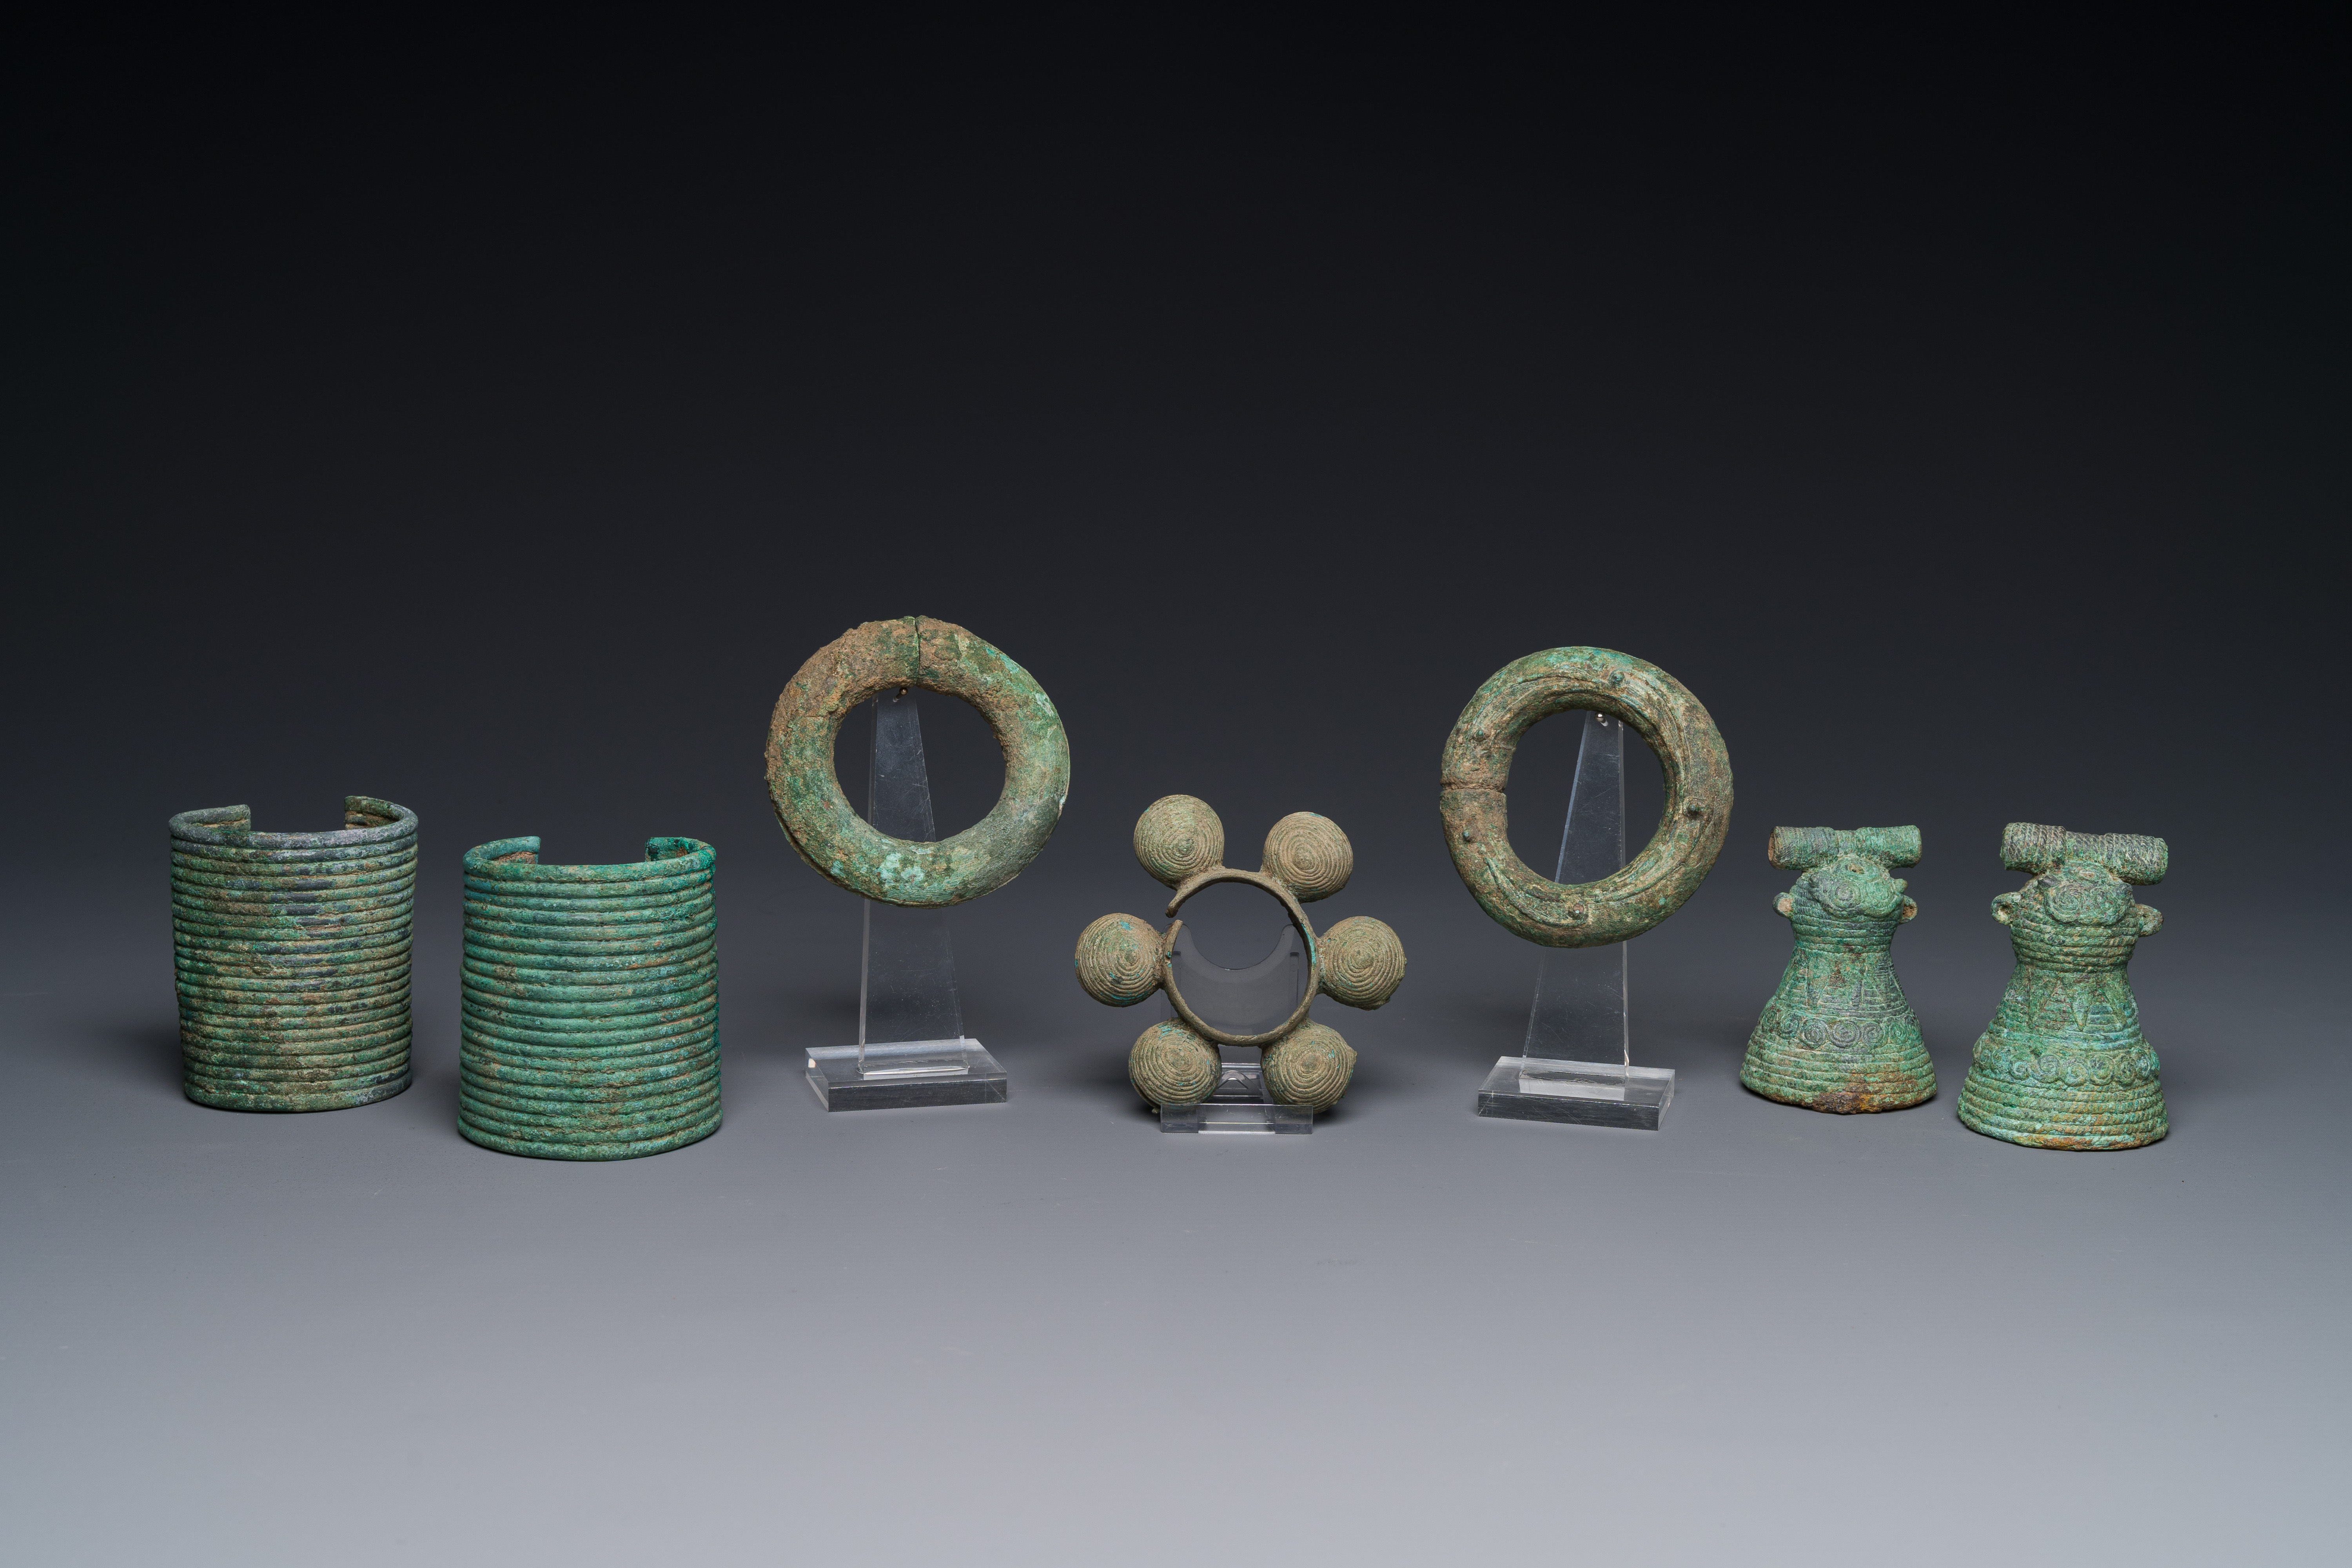 A collection of bronze bracelets and animal bells, Vietnam and Cambodia, 4th/1st C. B.C - Image 8 of 18